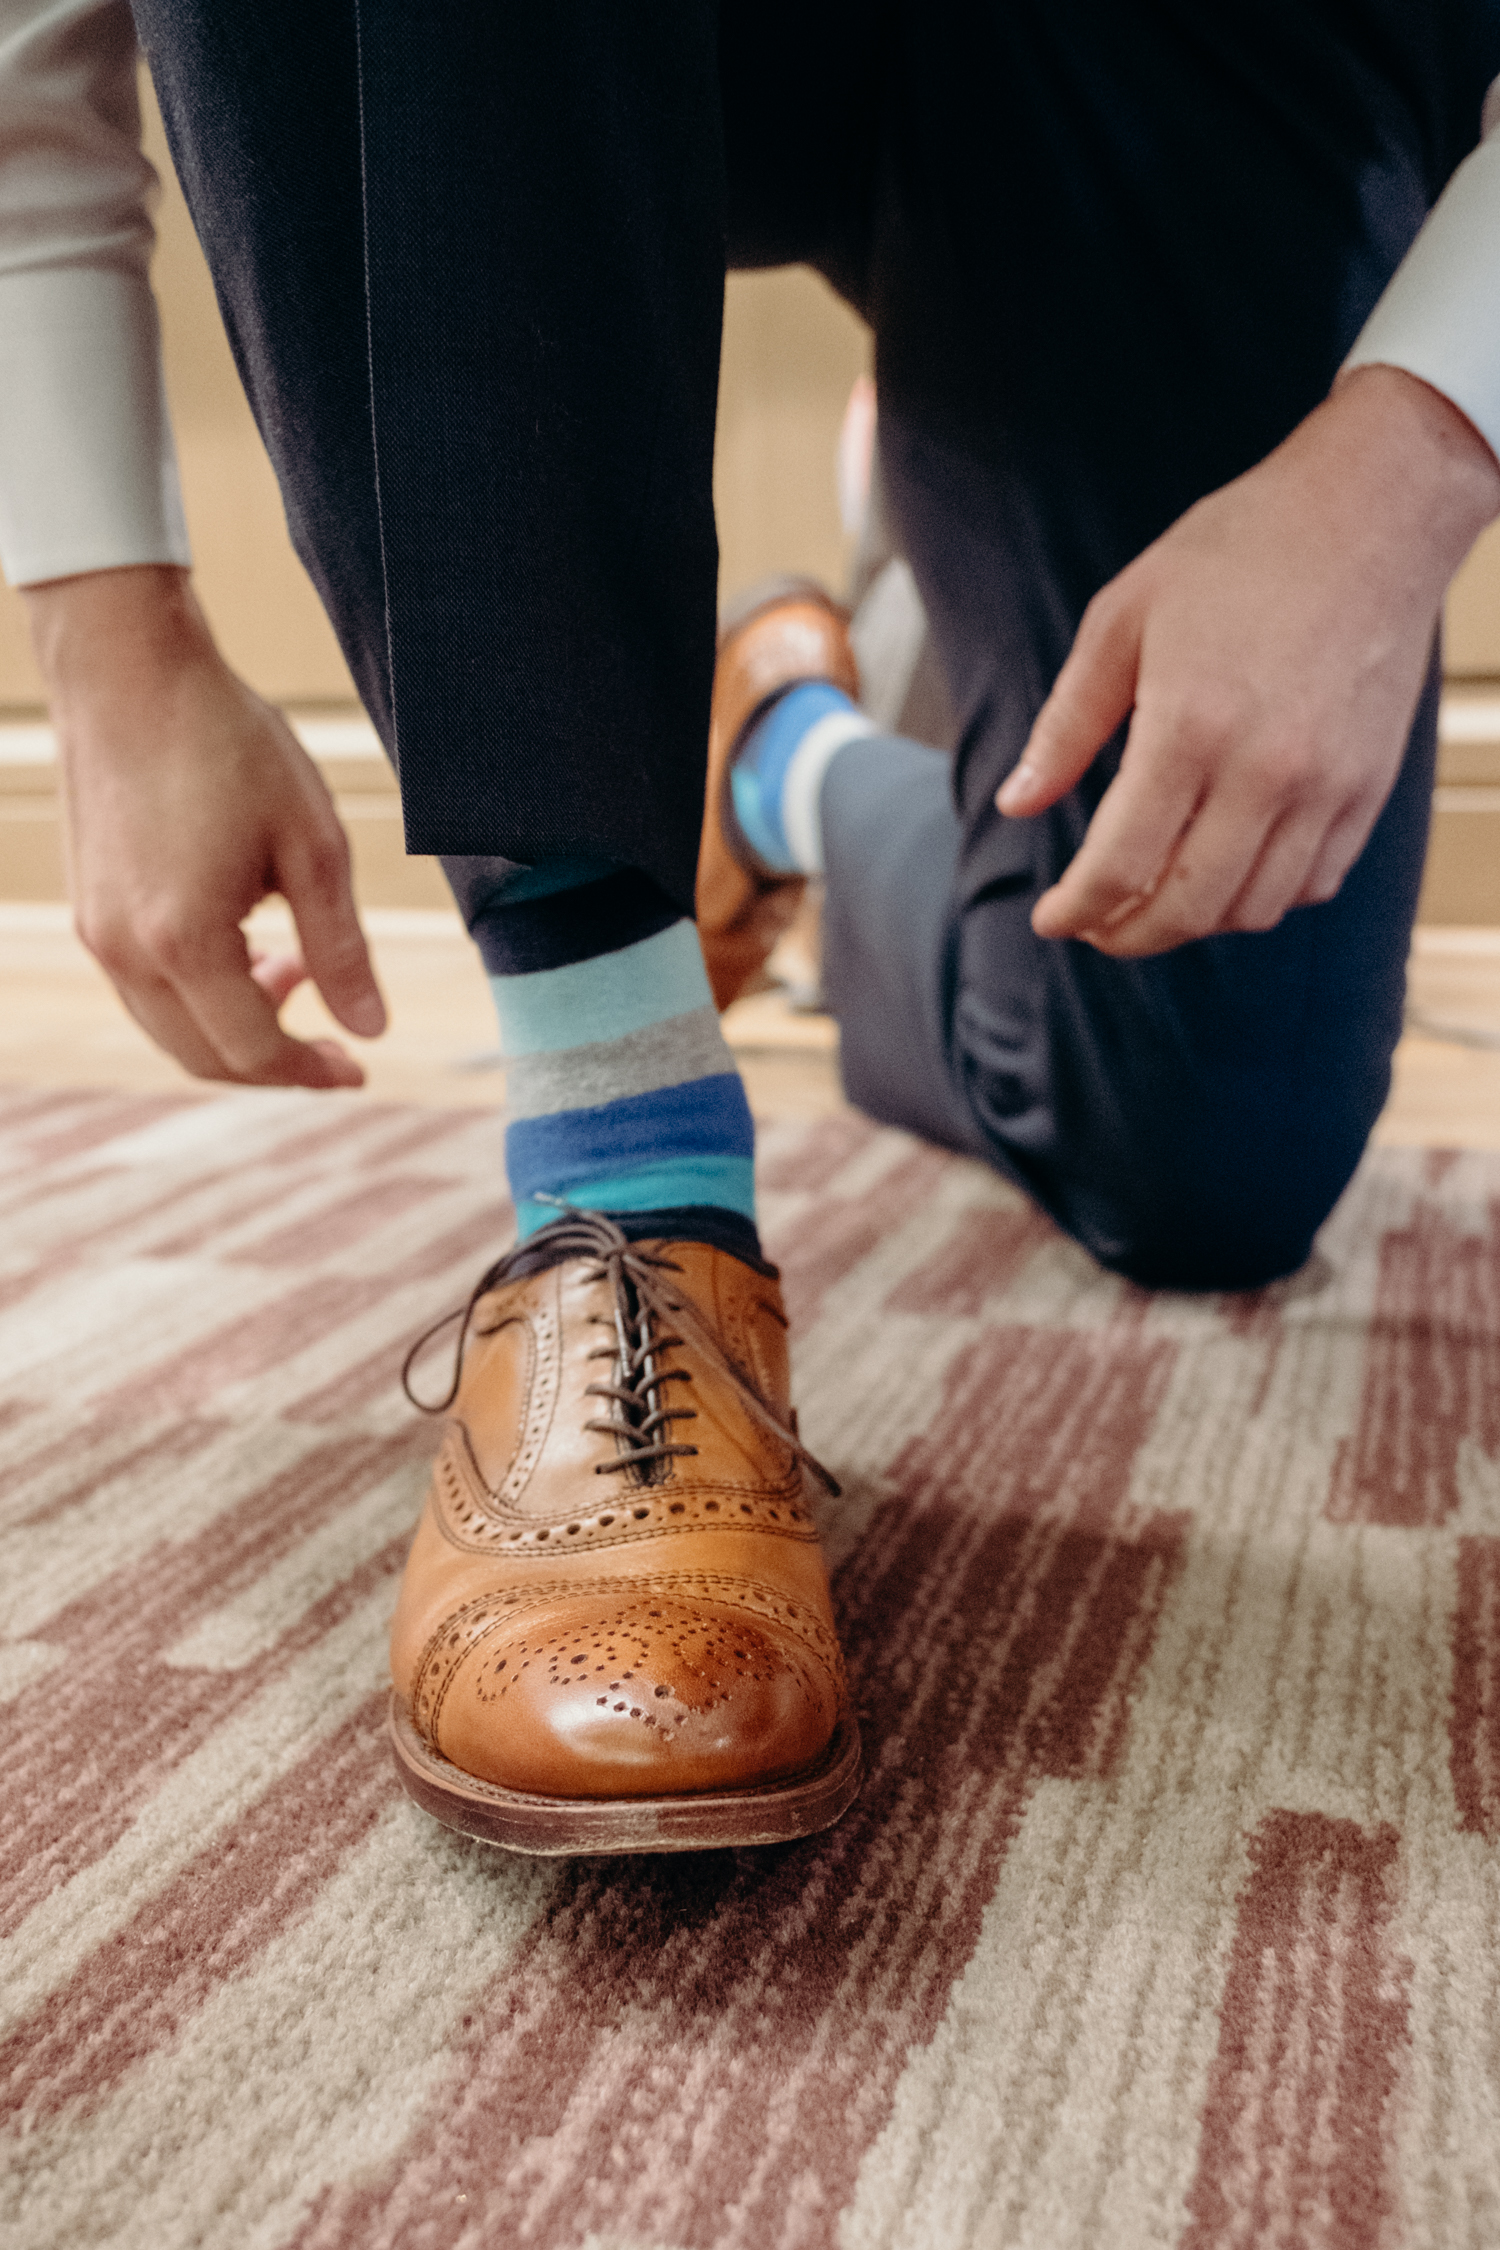 A groom with brown shoes and blue socks leans down to finish tying his shoes before his wedding at Lansdowne Resort.